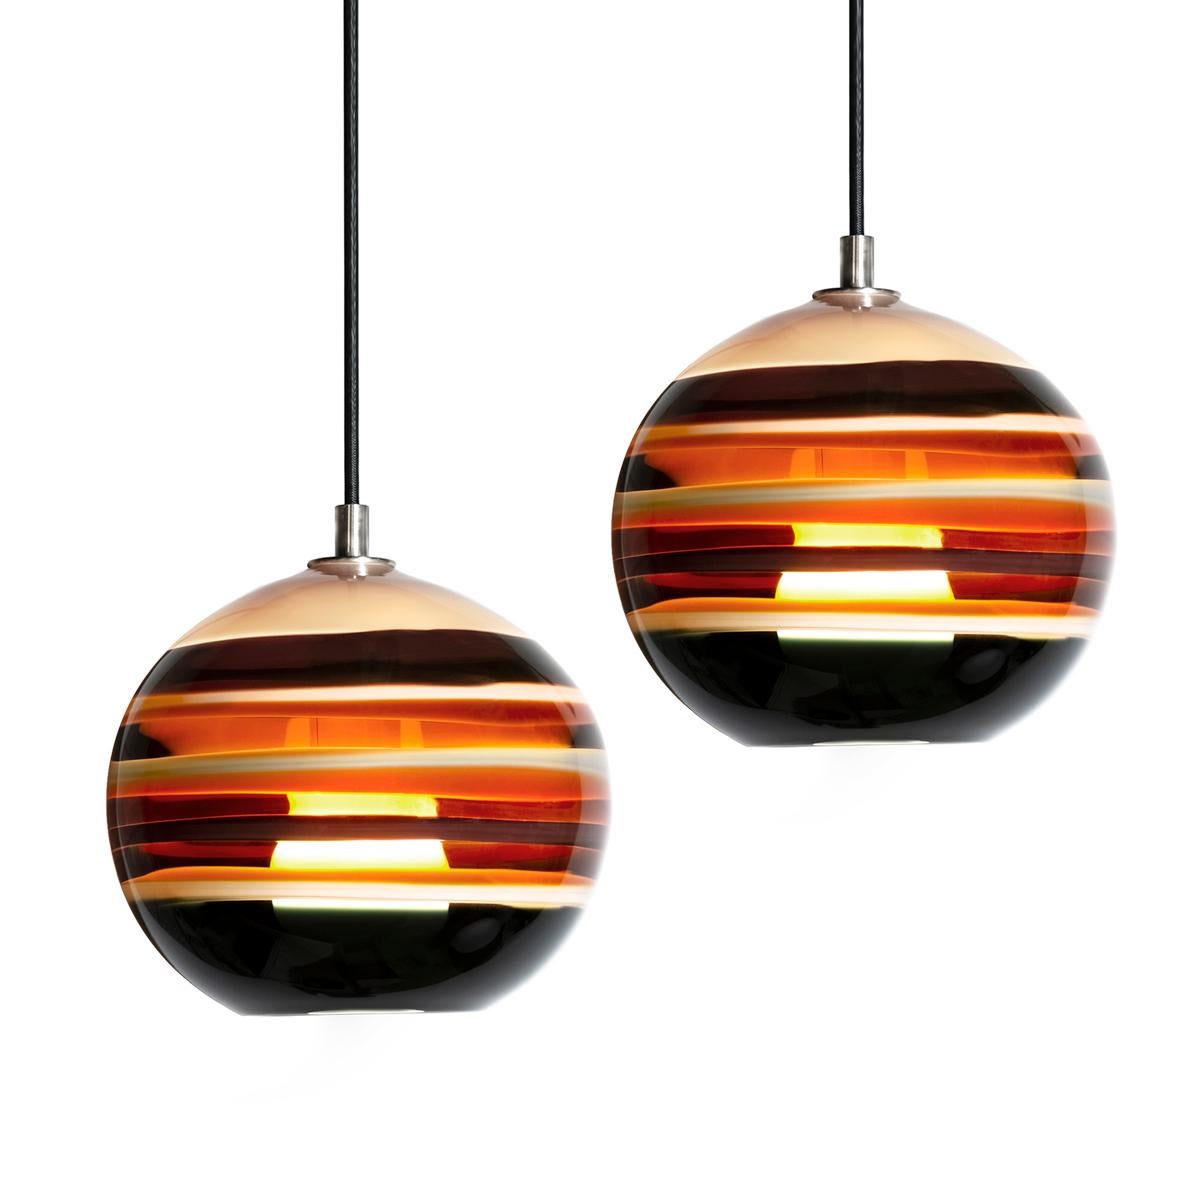 Pair of Amber Banded Orbs with Black cloth cord and satin nickel finish - In stock - Available Now
Measures: 9